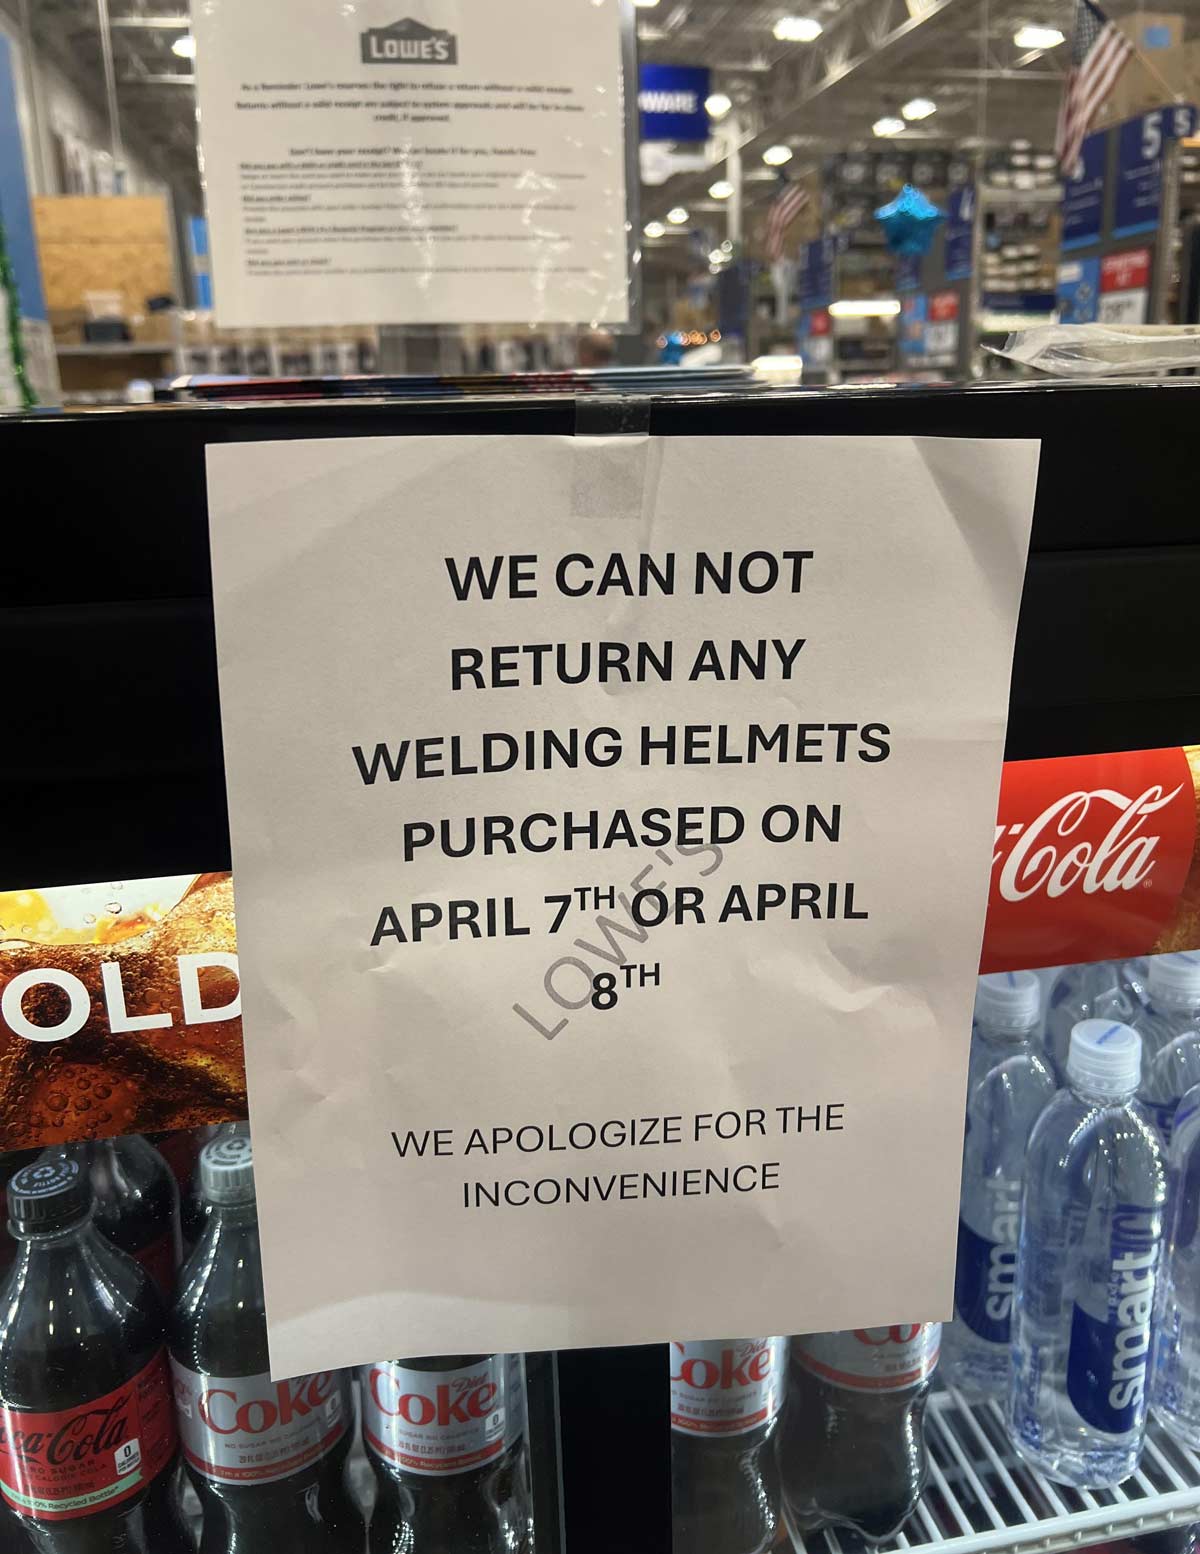 Lowe’s isn’t allowing Welding Mask returns if they were bought around the eclipse